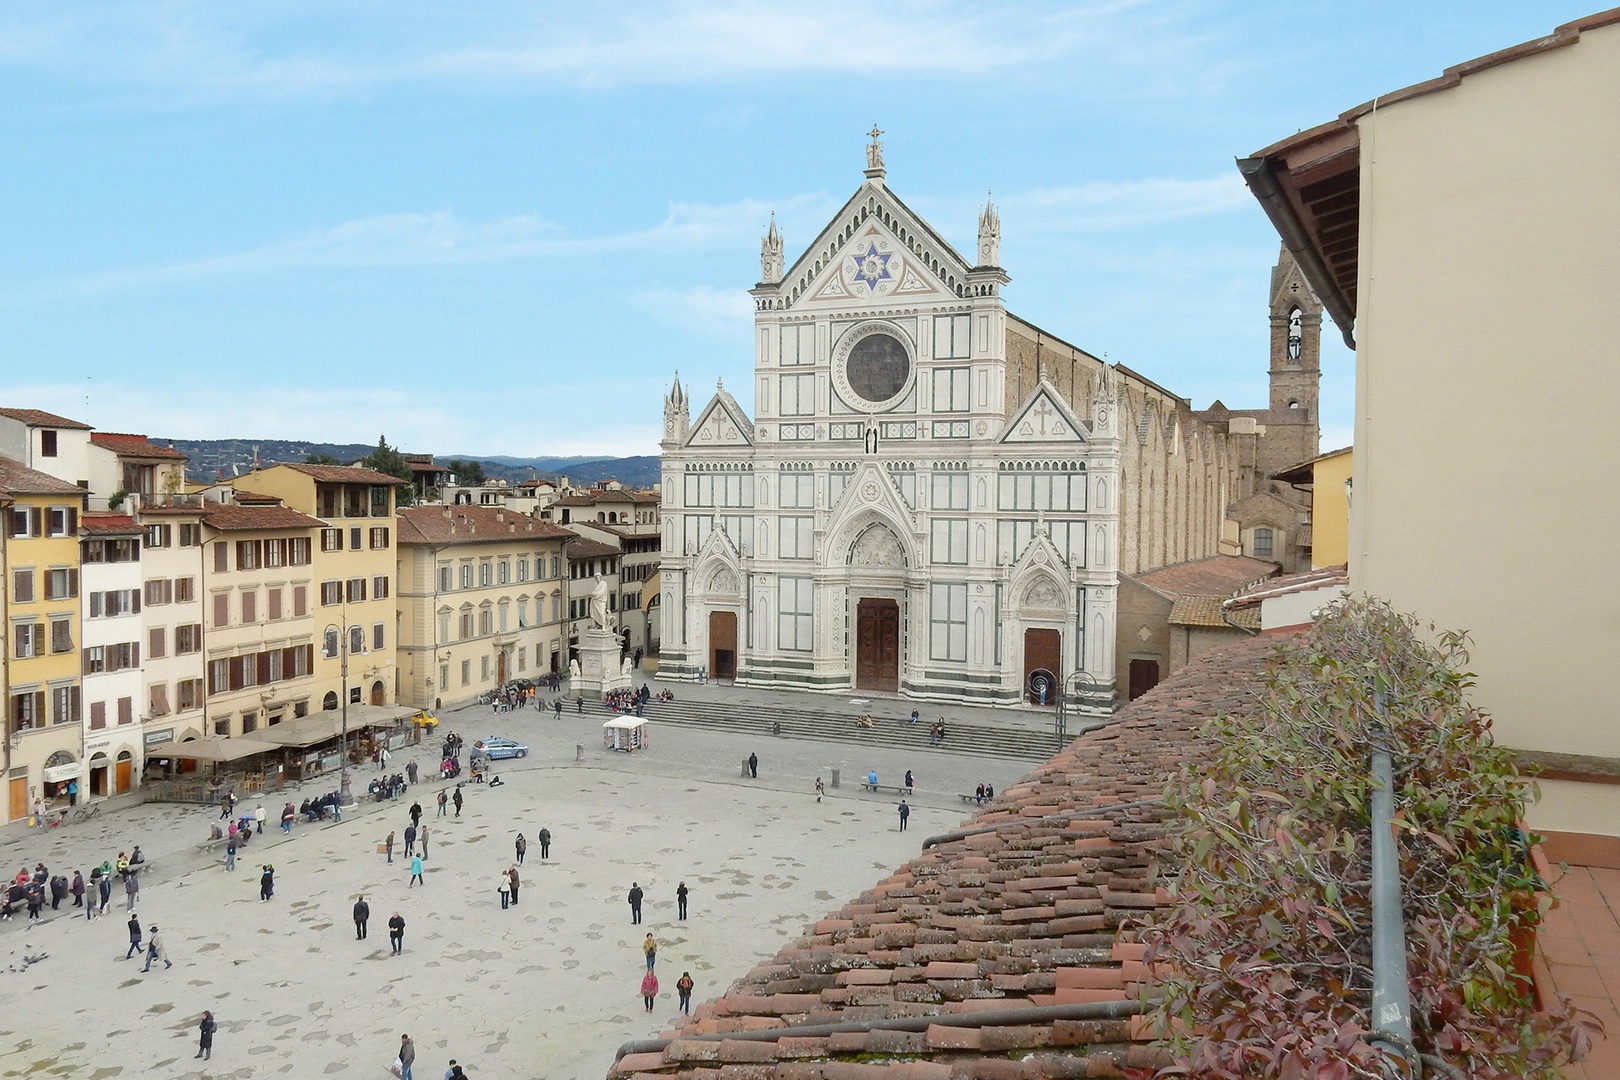 Several apartments in this palazzo have a splendid view of the piazza and basilica.